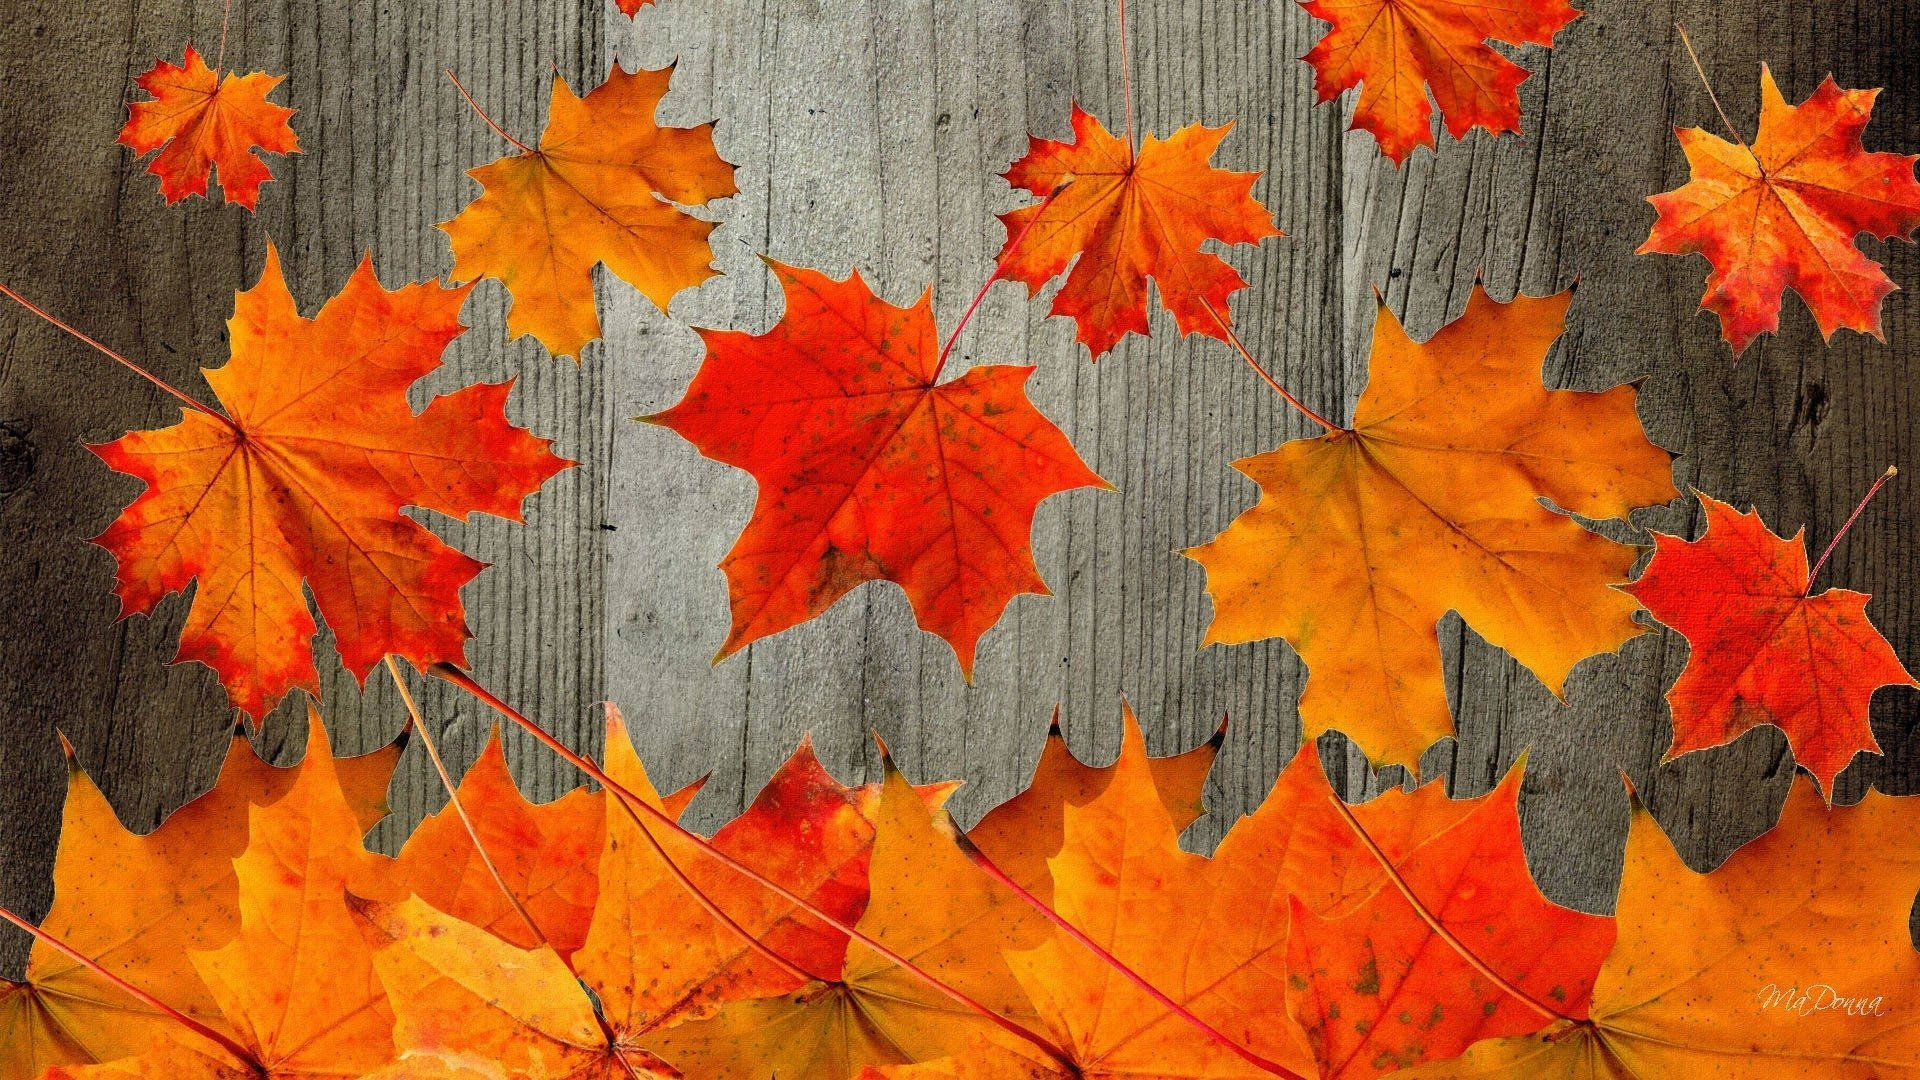 Look No Further For The Vibrant Displays And Colors Of Fall – These Red Maple Leaves Have You Covered! Background